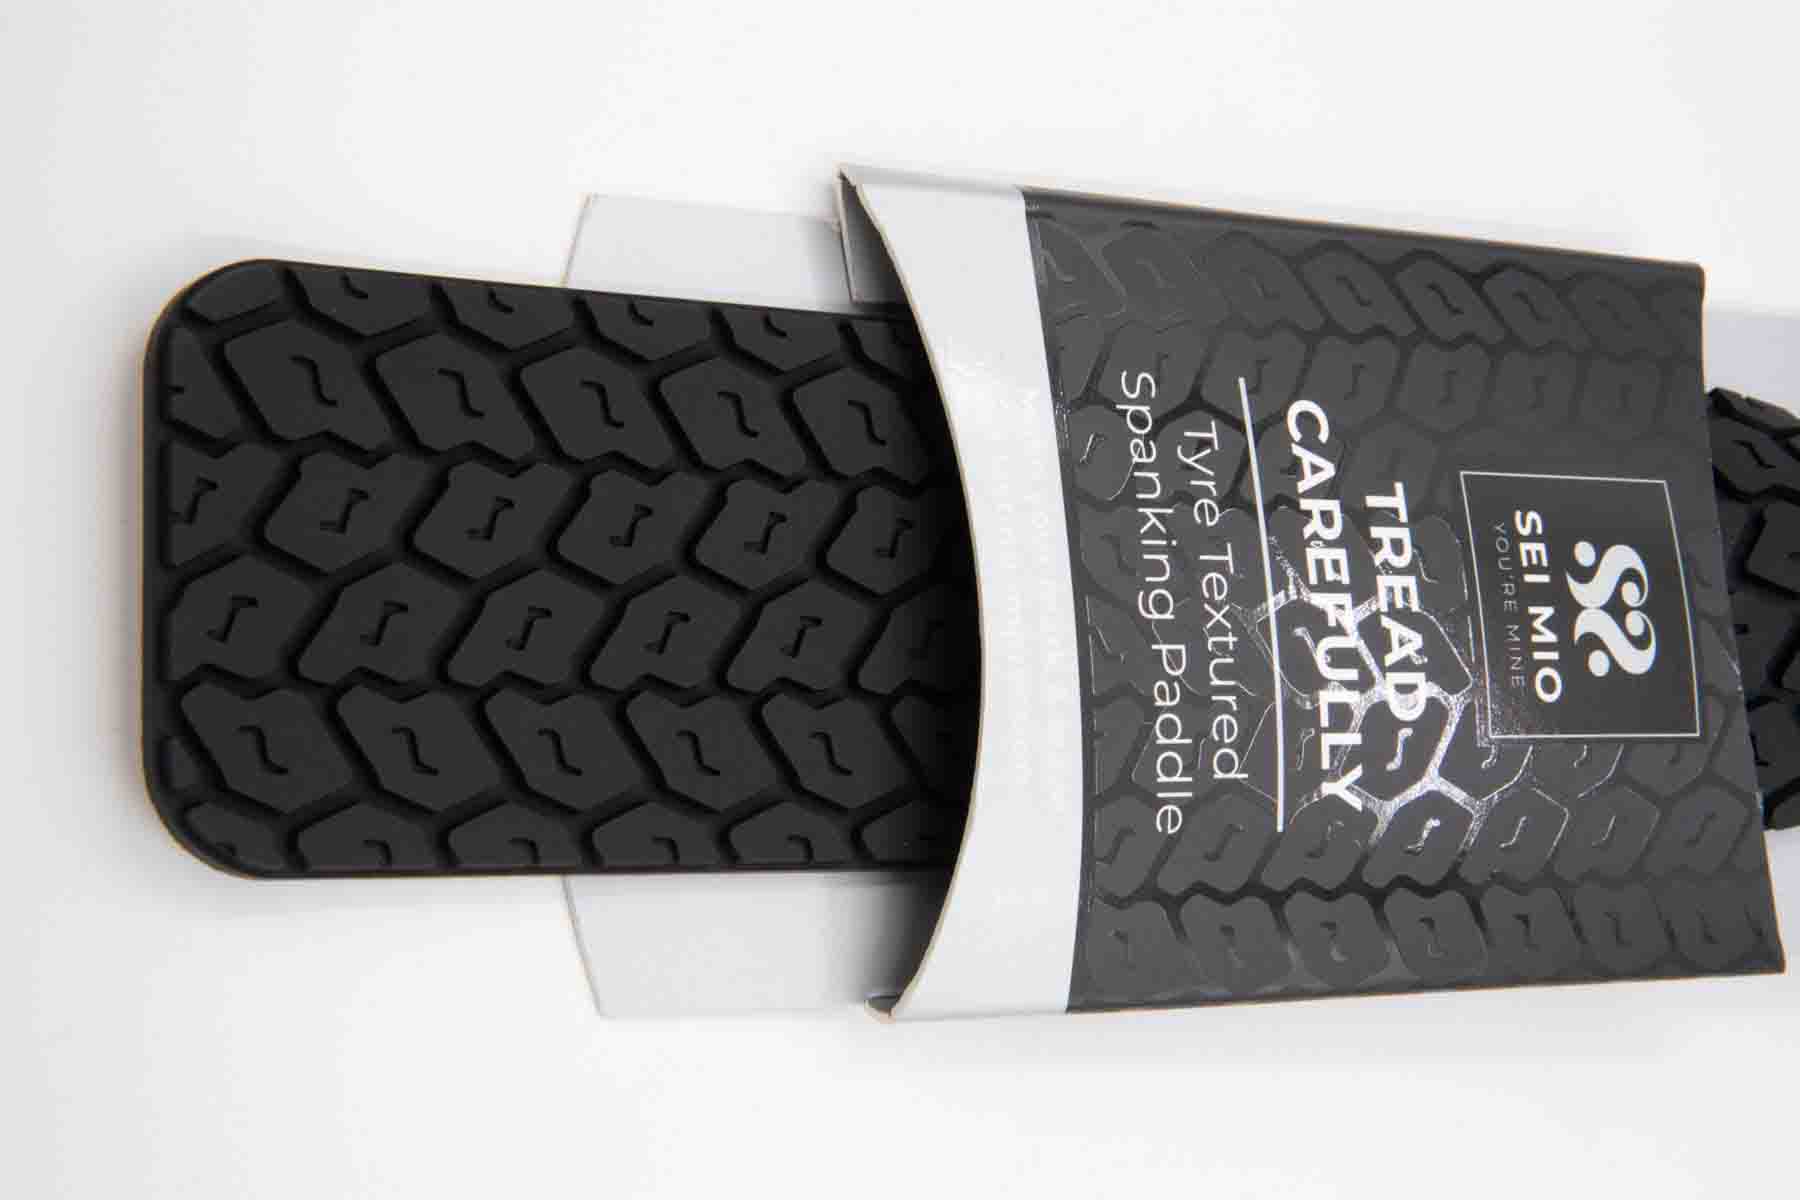 A close up of the treads on the black Sei Mio Tyre Paddle.